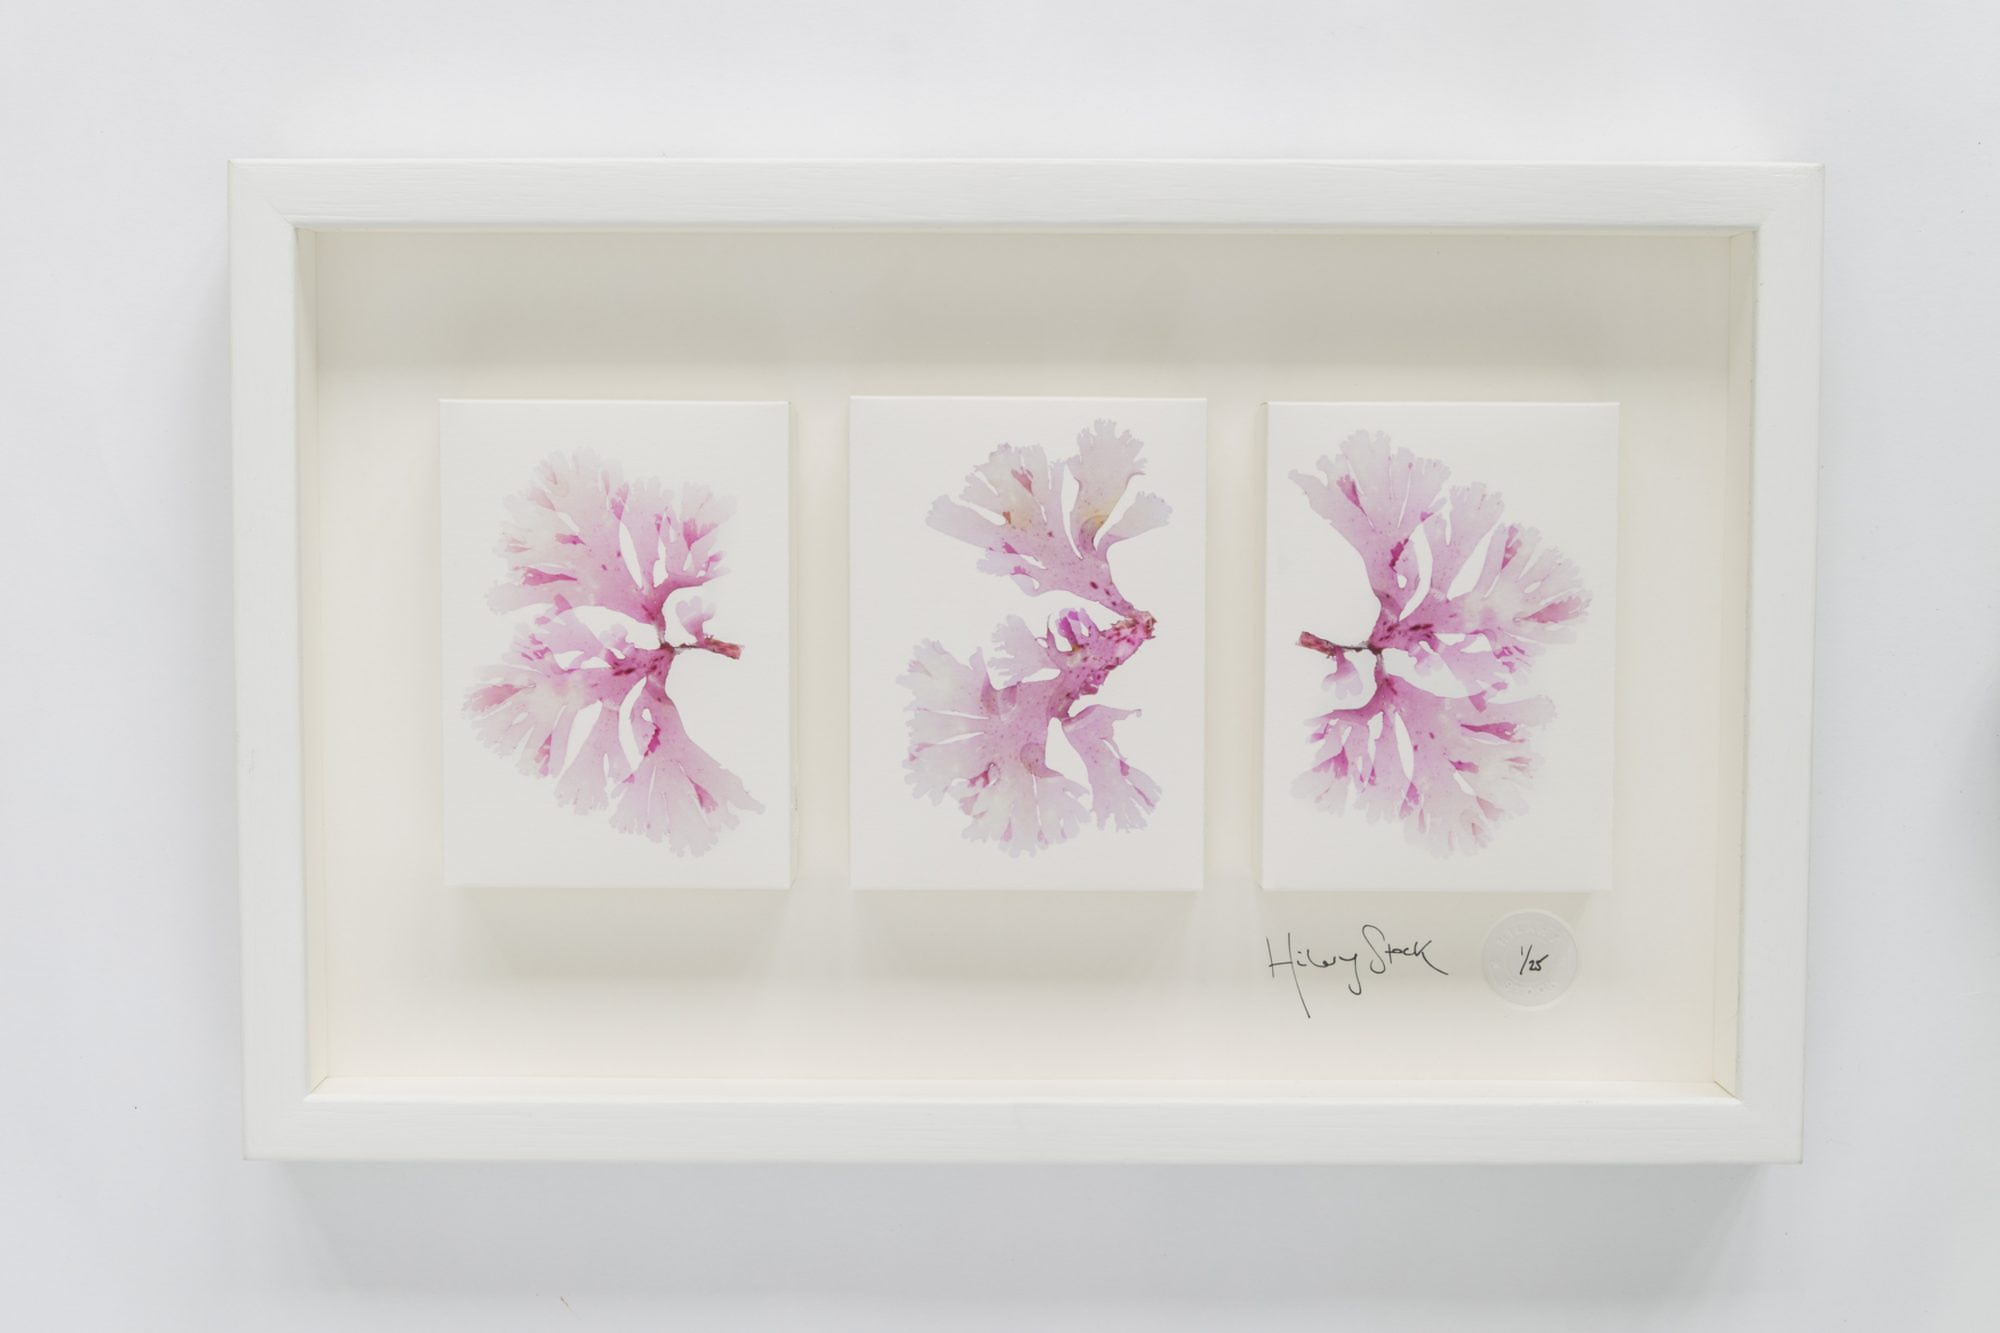 See Pinks, Photographic fine art by Hilary Stock